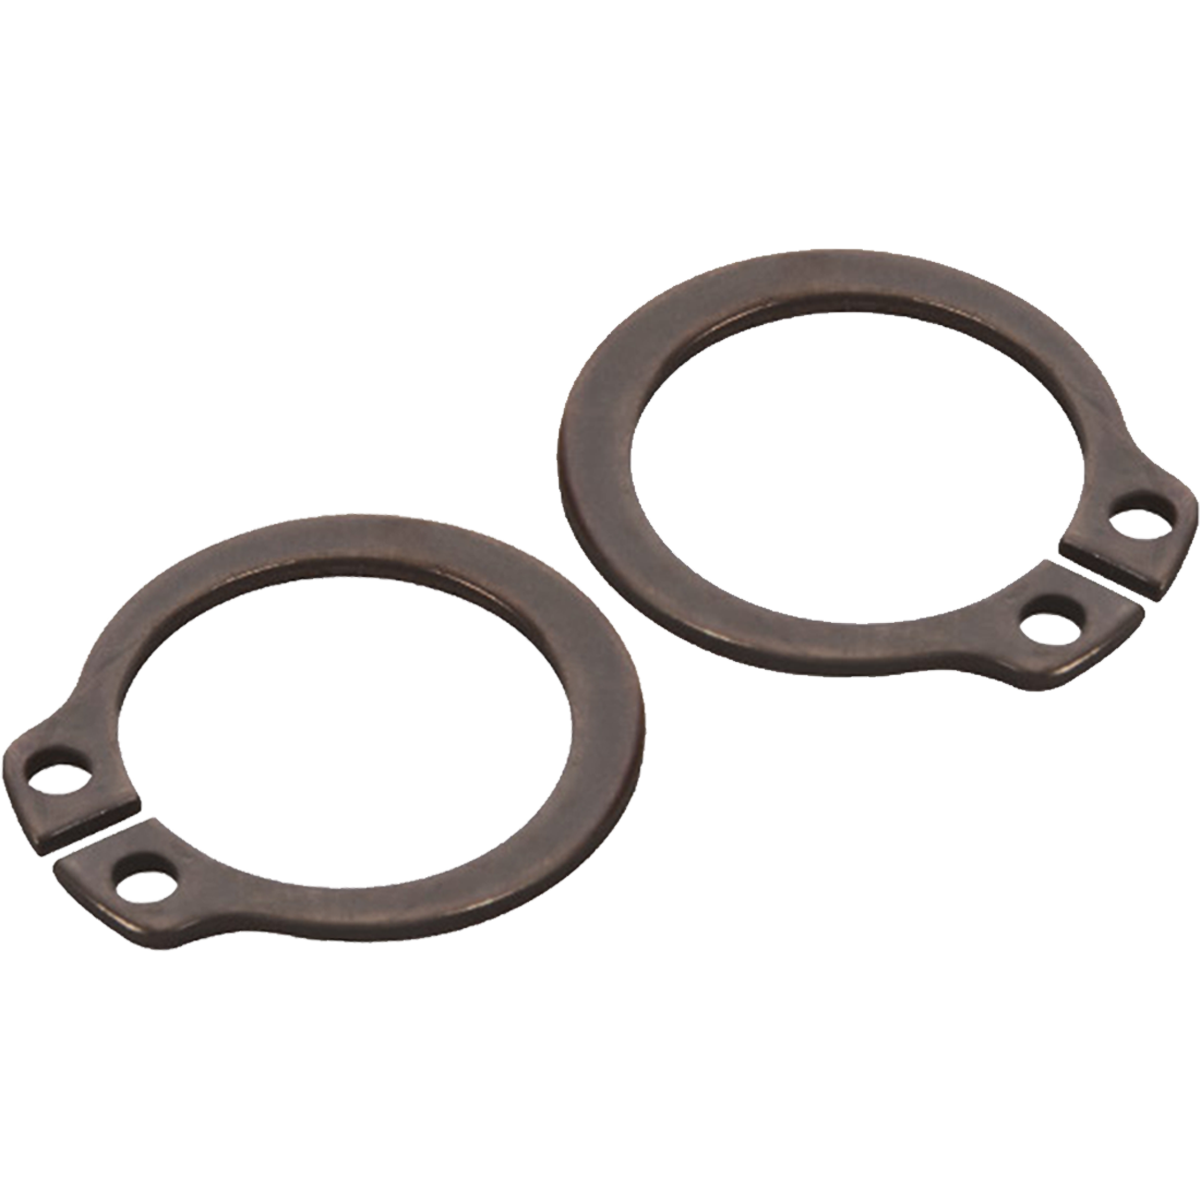 Circlips, also known as retaining rings, snap rings, or Jesus clips